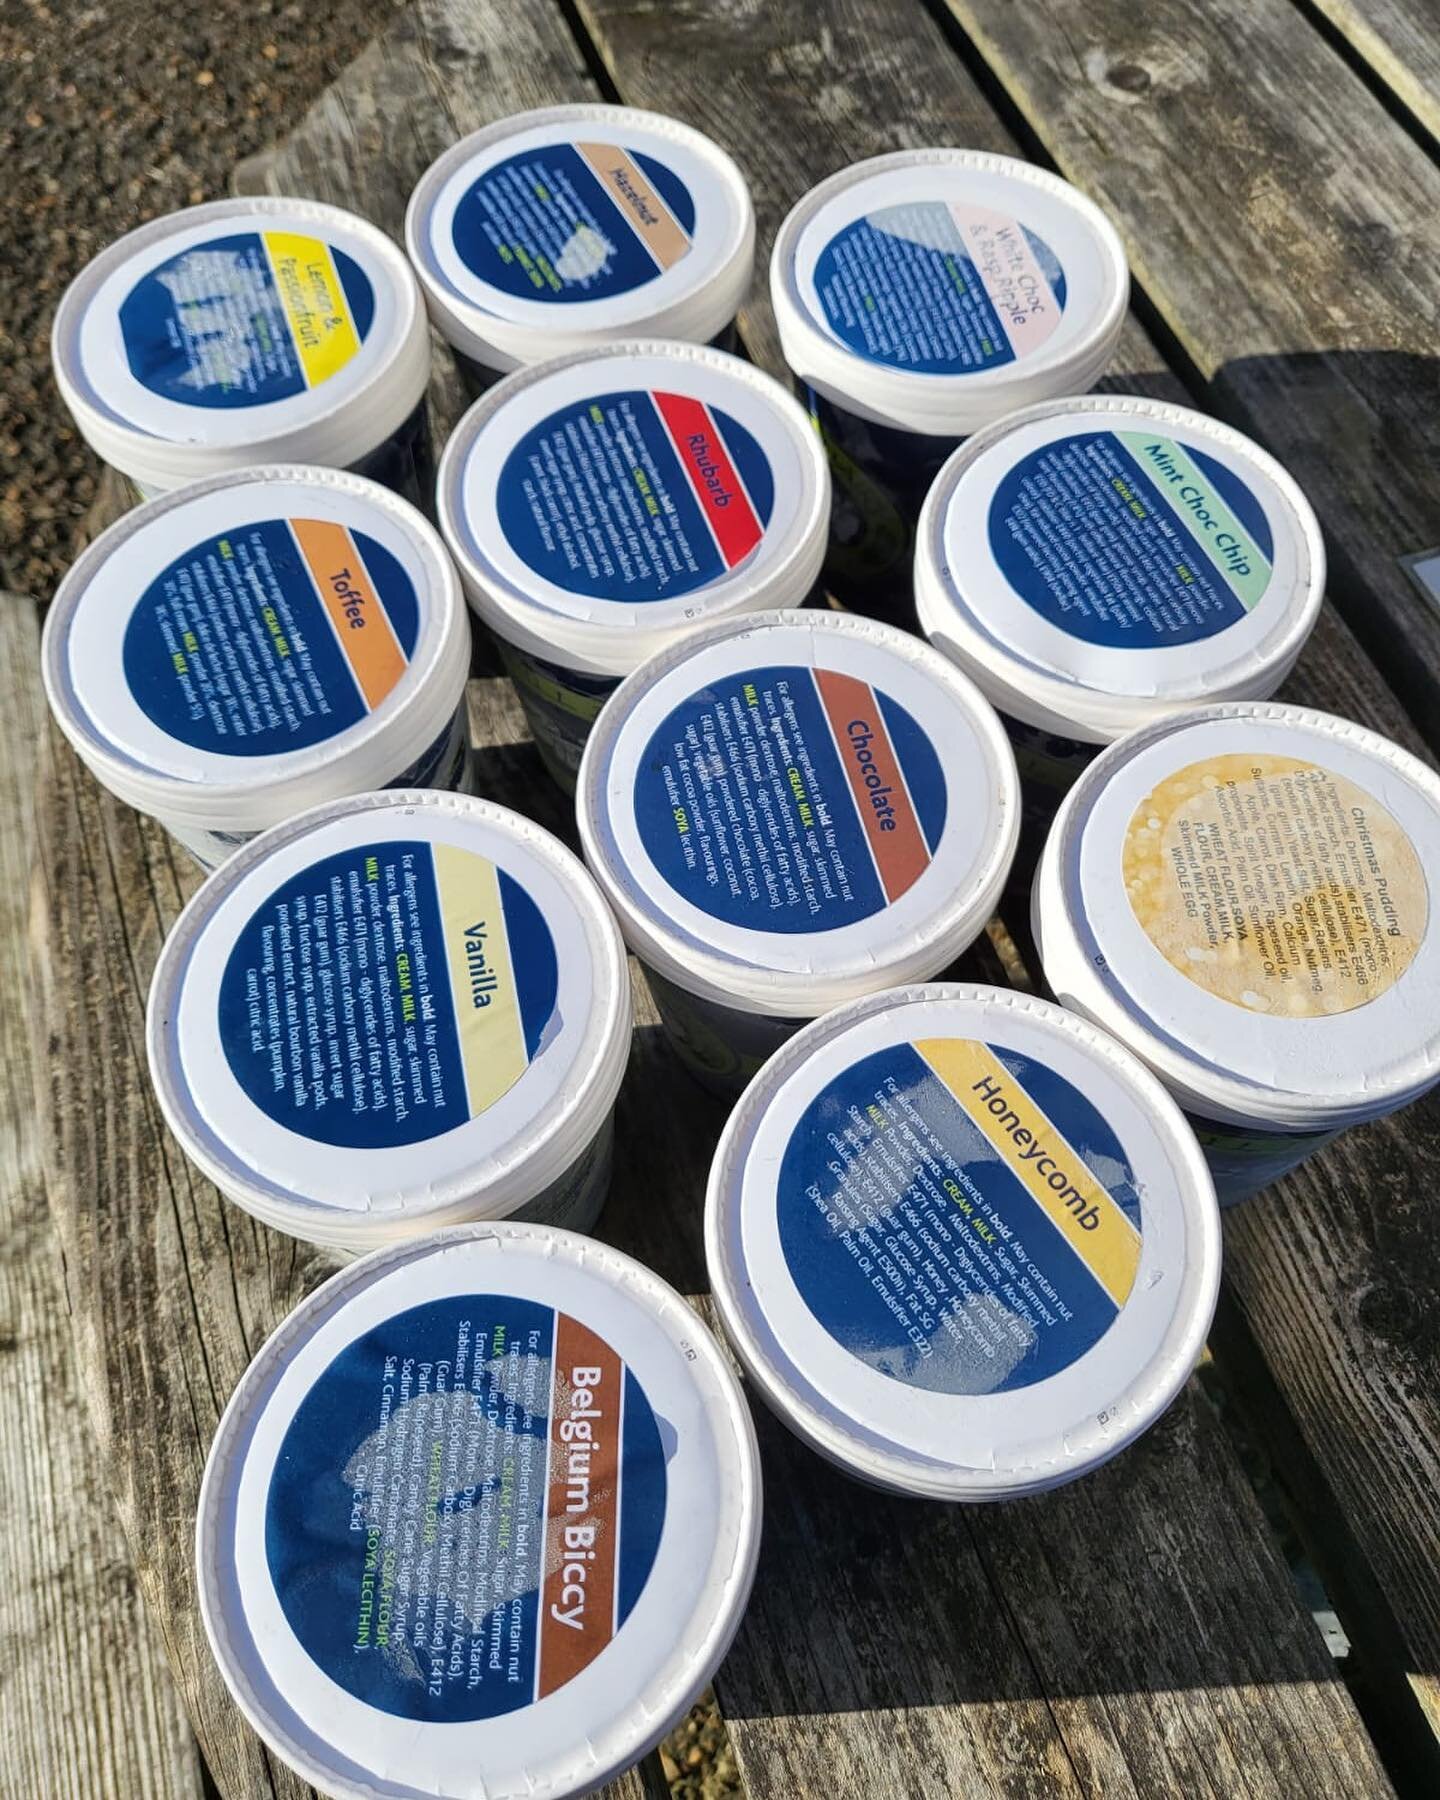 Hi everyone. I hope you&rsquo;ve had a brilliant winter, we sure have at ice cream HQ in the build up to spring. 

We have been working on adding new flavours to our scoop range also existing flavours to our pots.

This sees the addition of Lemon &am